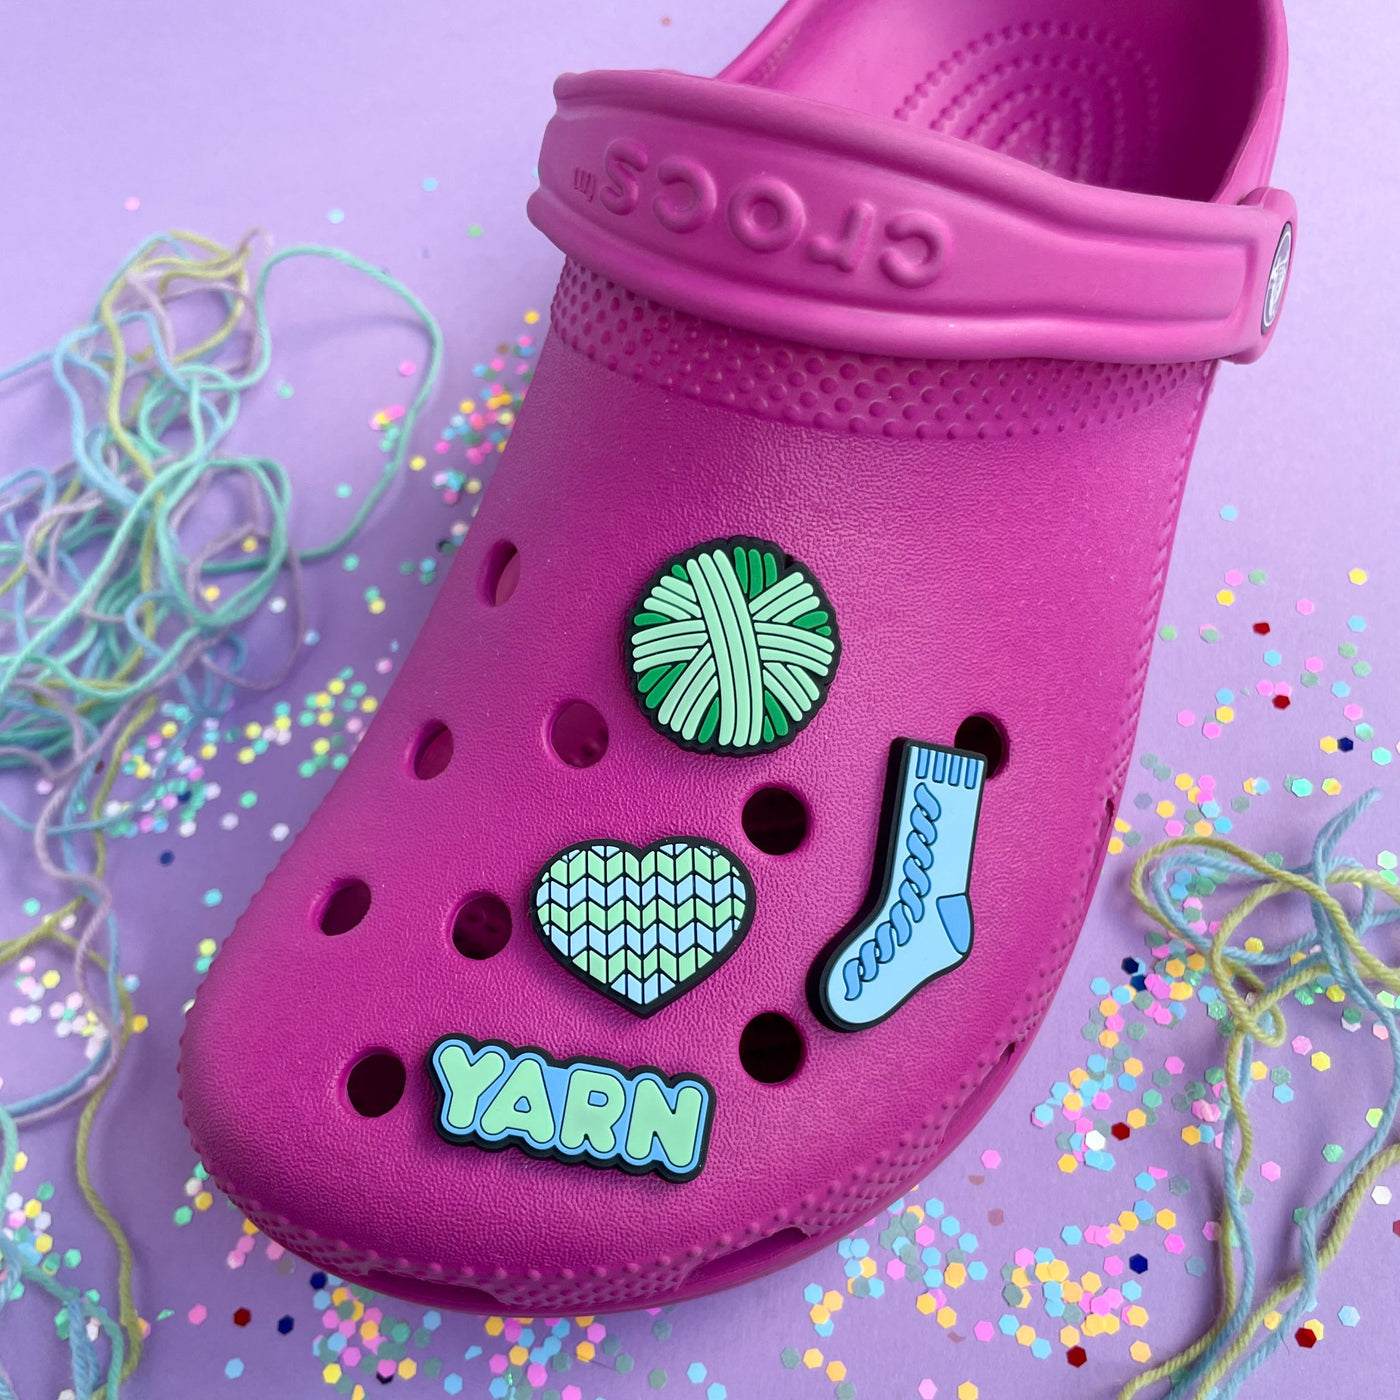 A hot pink Croc shoe with charms on it shaped like a yarn ball, heart, sock, and the word yarn. The charms are shades of mint green and blue. 